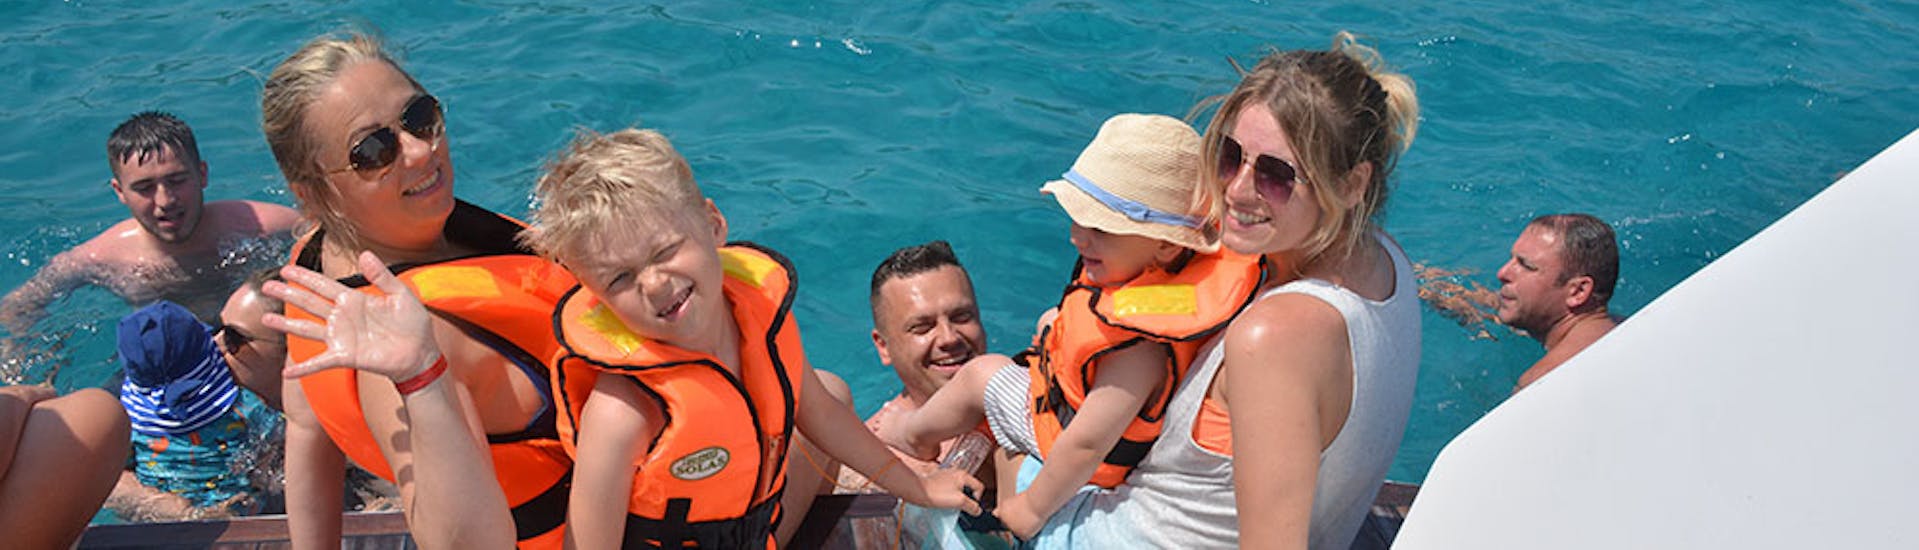 All-inclusive Boat Trip to Riccos Bay from Paphos with Pick-up and BBQ.